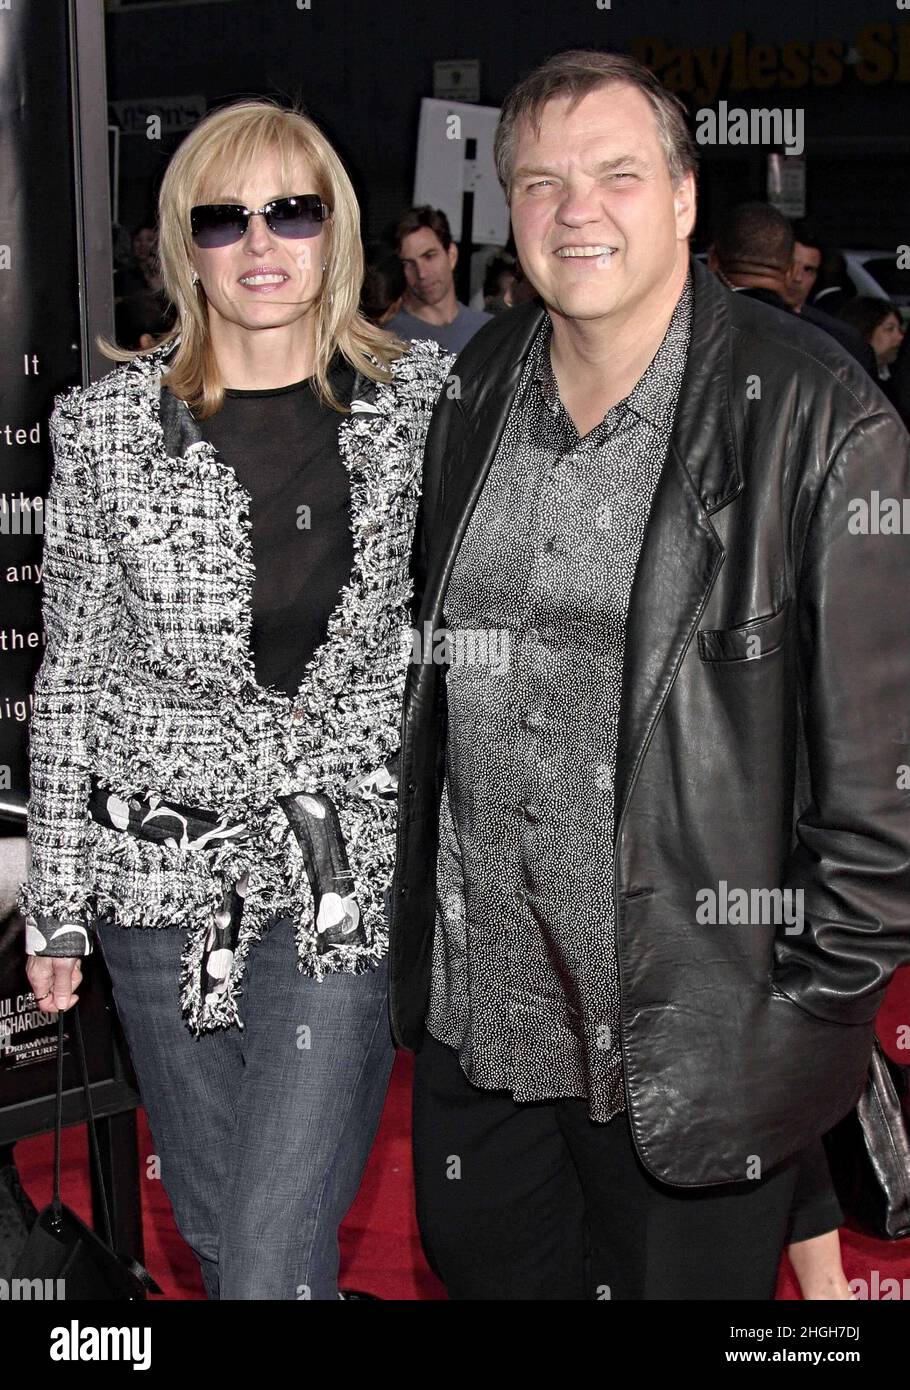 Los Angeles, California, USA. 2nd Aug, 2004. MeatLoaf. 'Collateral' Los Angeles premiere at the Orpheum theatre. Photo Credit: Giulio Marcocchi/Sipa Press/filmcollateral.44/0408031627 Credit: Sipa USA/Alamy Live News Stock Photo